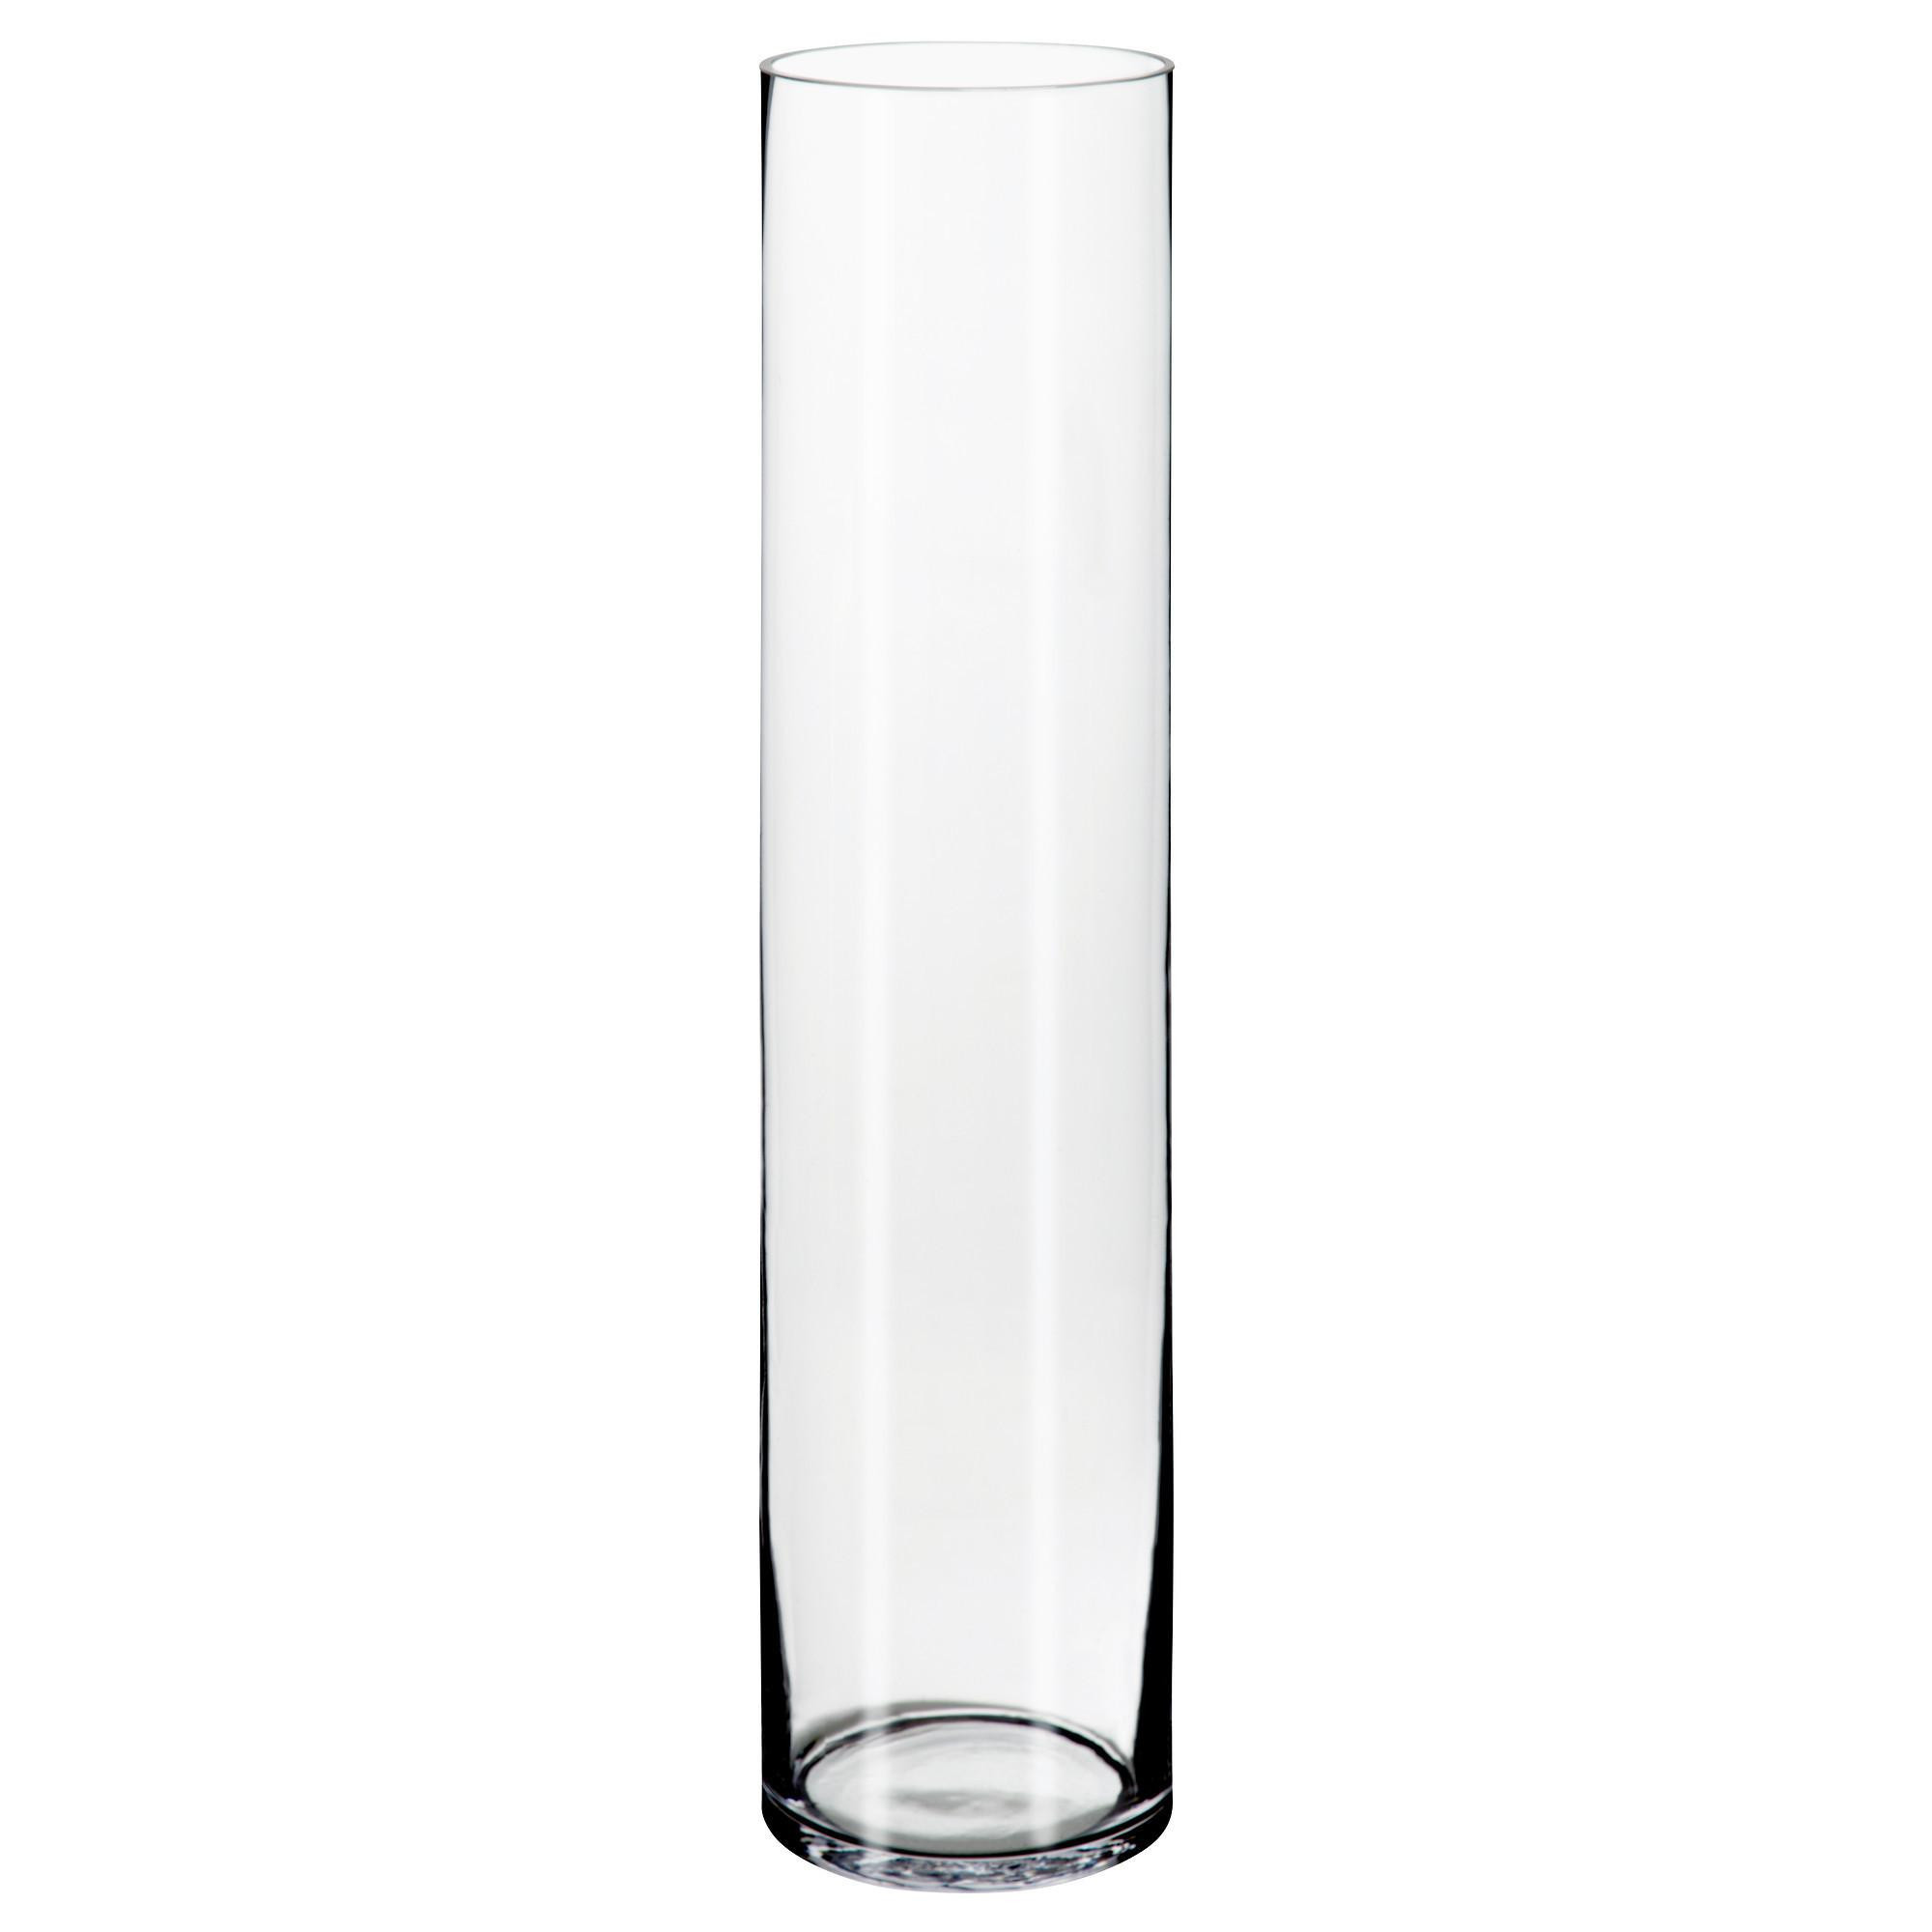 30 Spectacular 12 Inch Cylinder Vases wholesale 2024 free download 12 inch cylinder vases wholesale of white cylinder vase images 12 inch cylinder vases bulk vase and for white cylinder vase photograph ikea white chair unique living room vase glass fresh pe